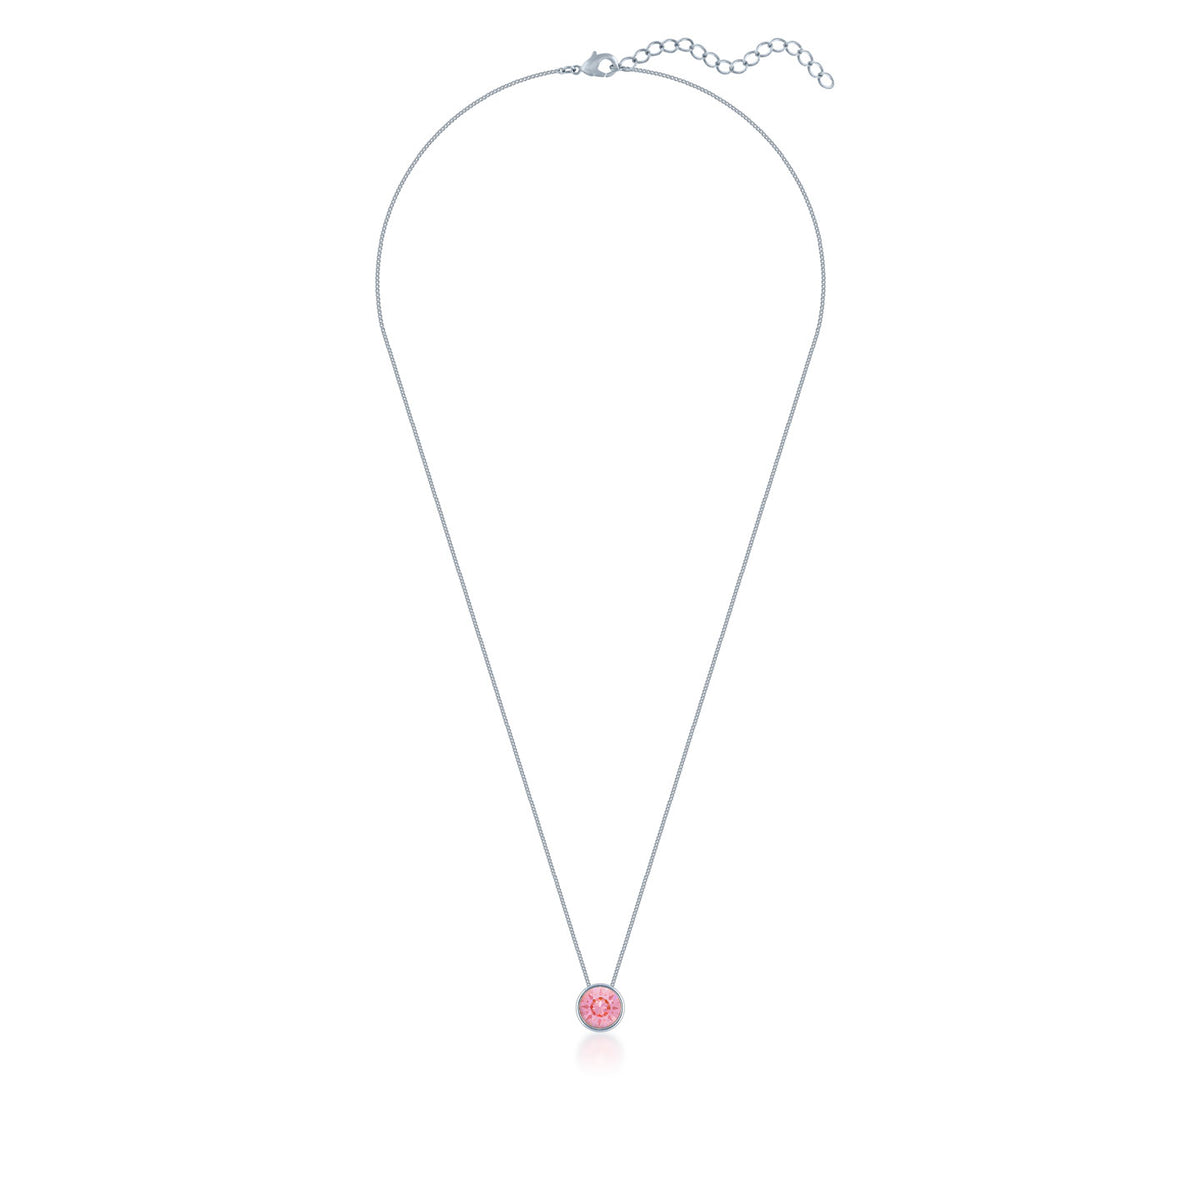 Harley Small Pendant Necklace with Pink Light Rose Round Crystals from Swarovski Silver Toned Rhodium Plated - Ed Heart